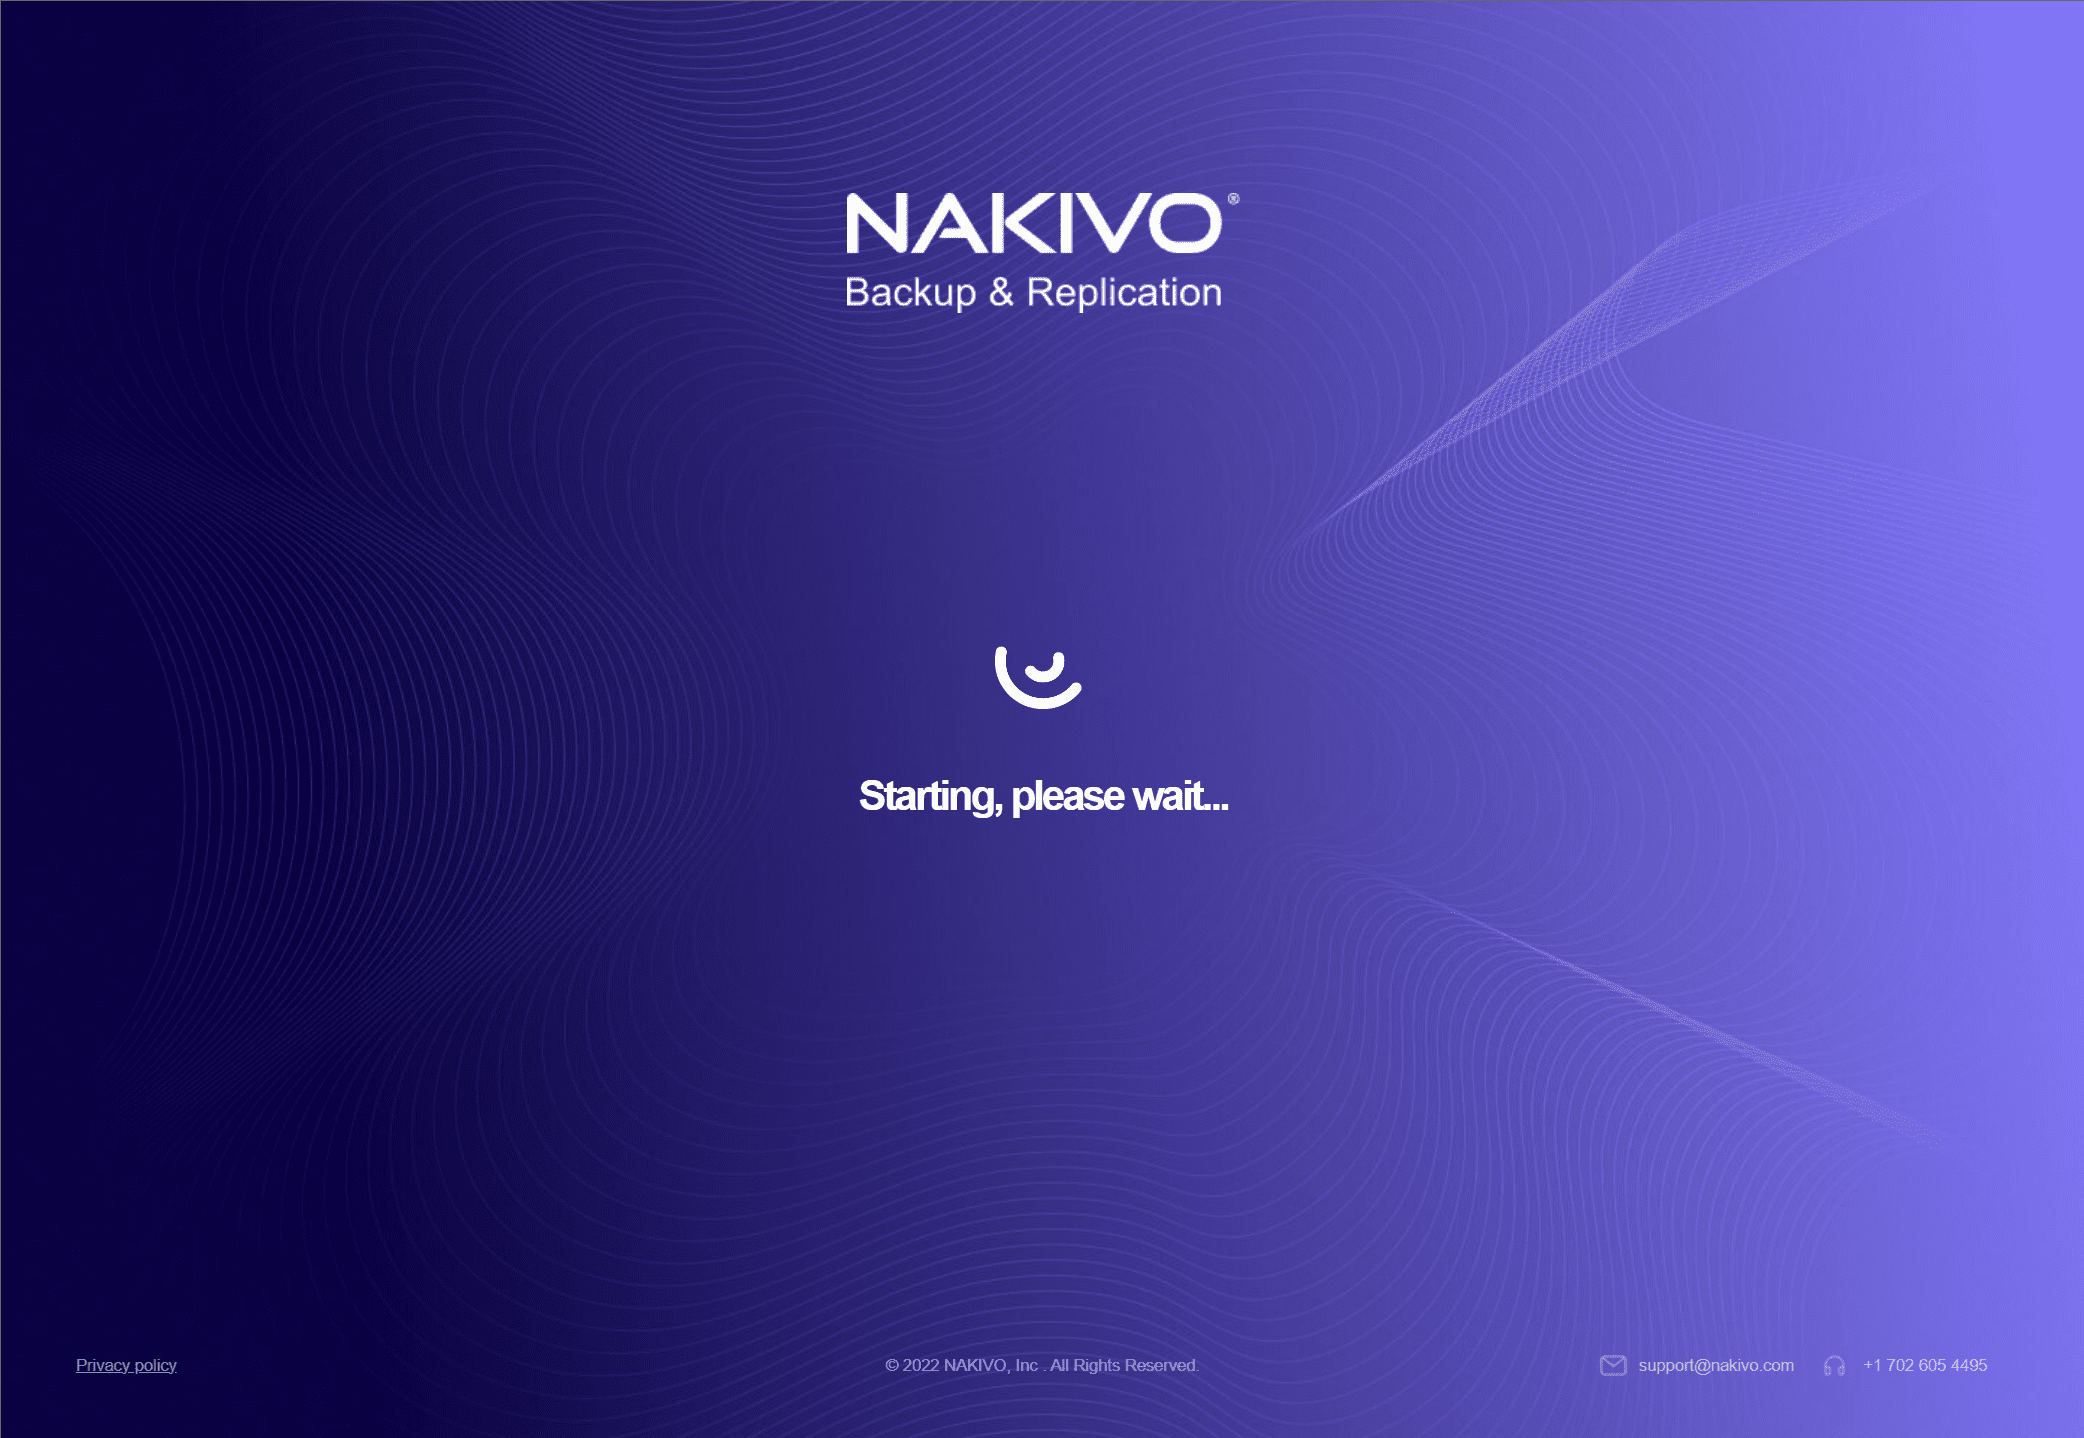 The NAKIVO solution starting up after deployment